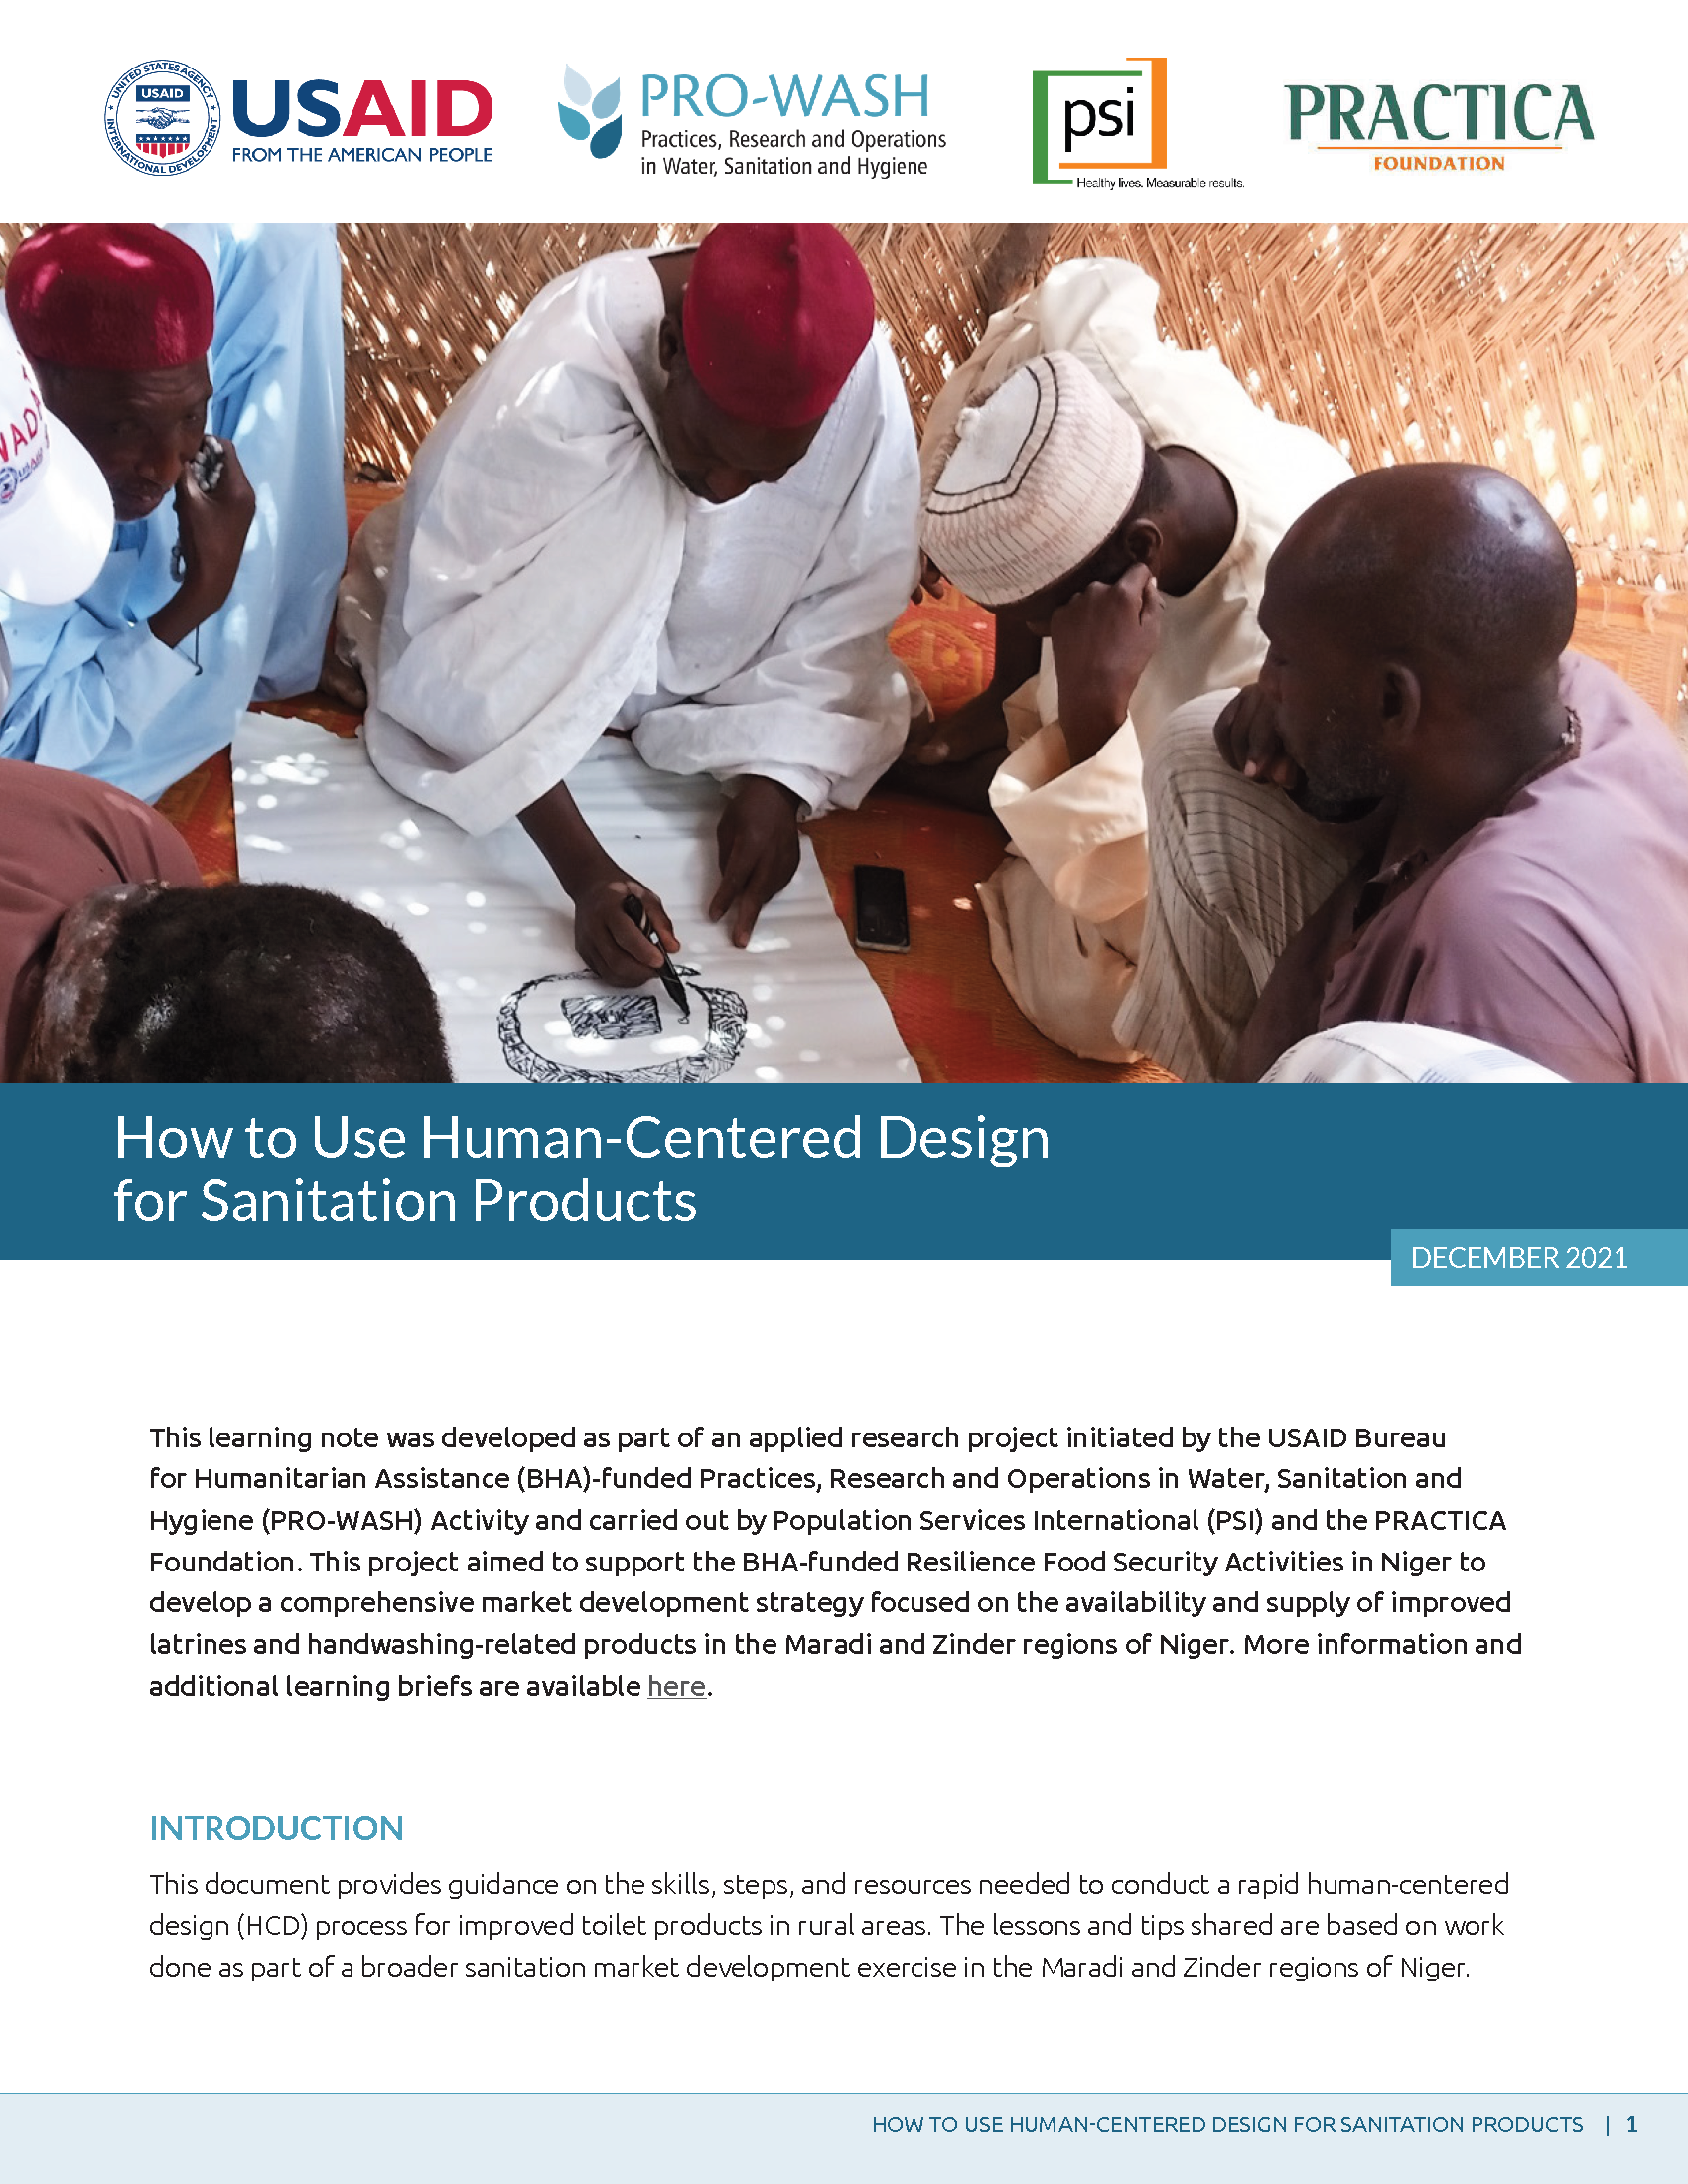 Cover page for How to Use Human-Centered Design for Sanitation Products